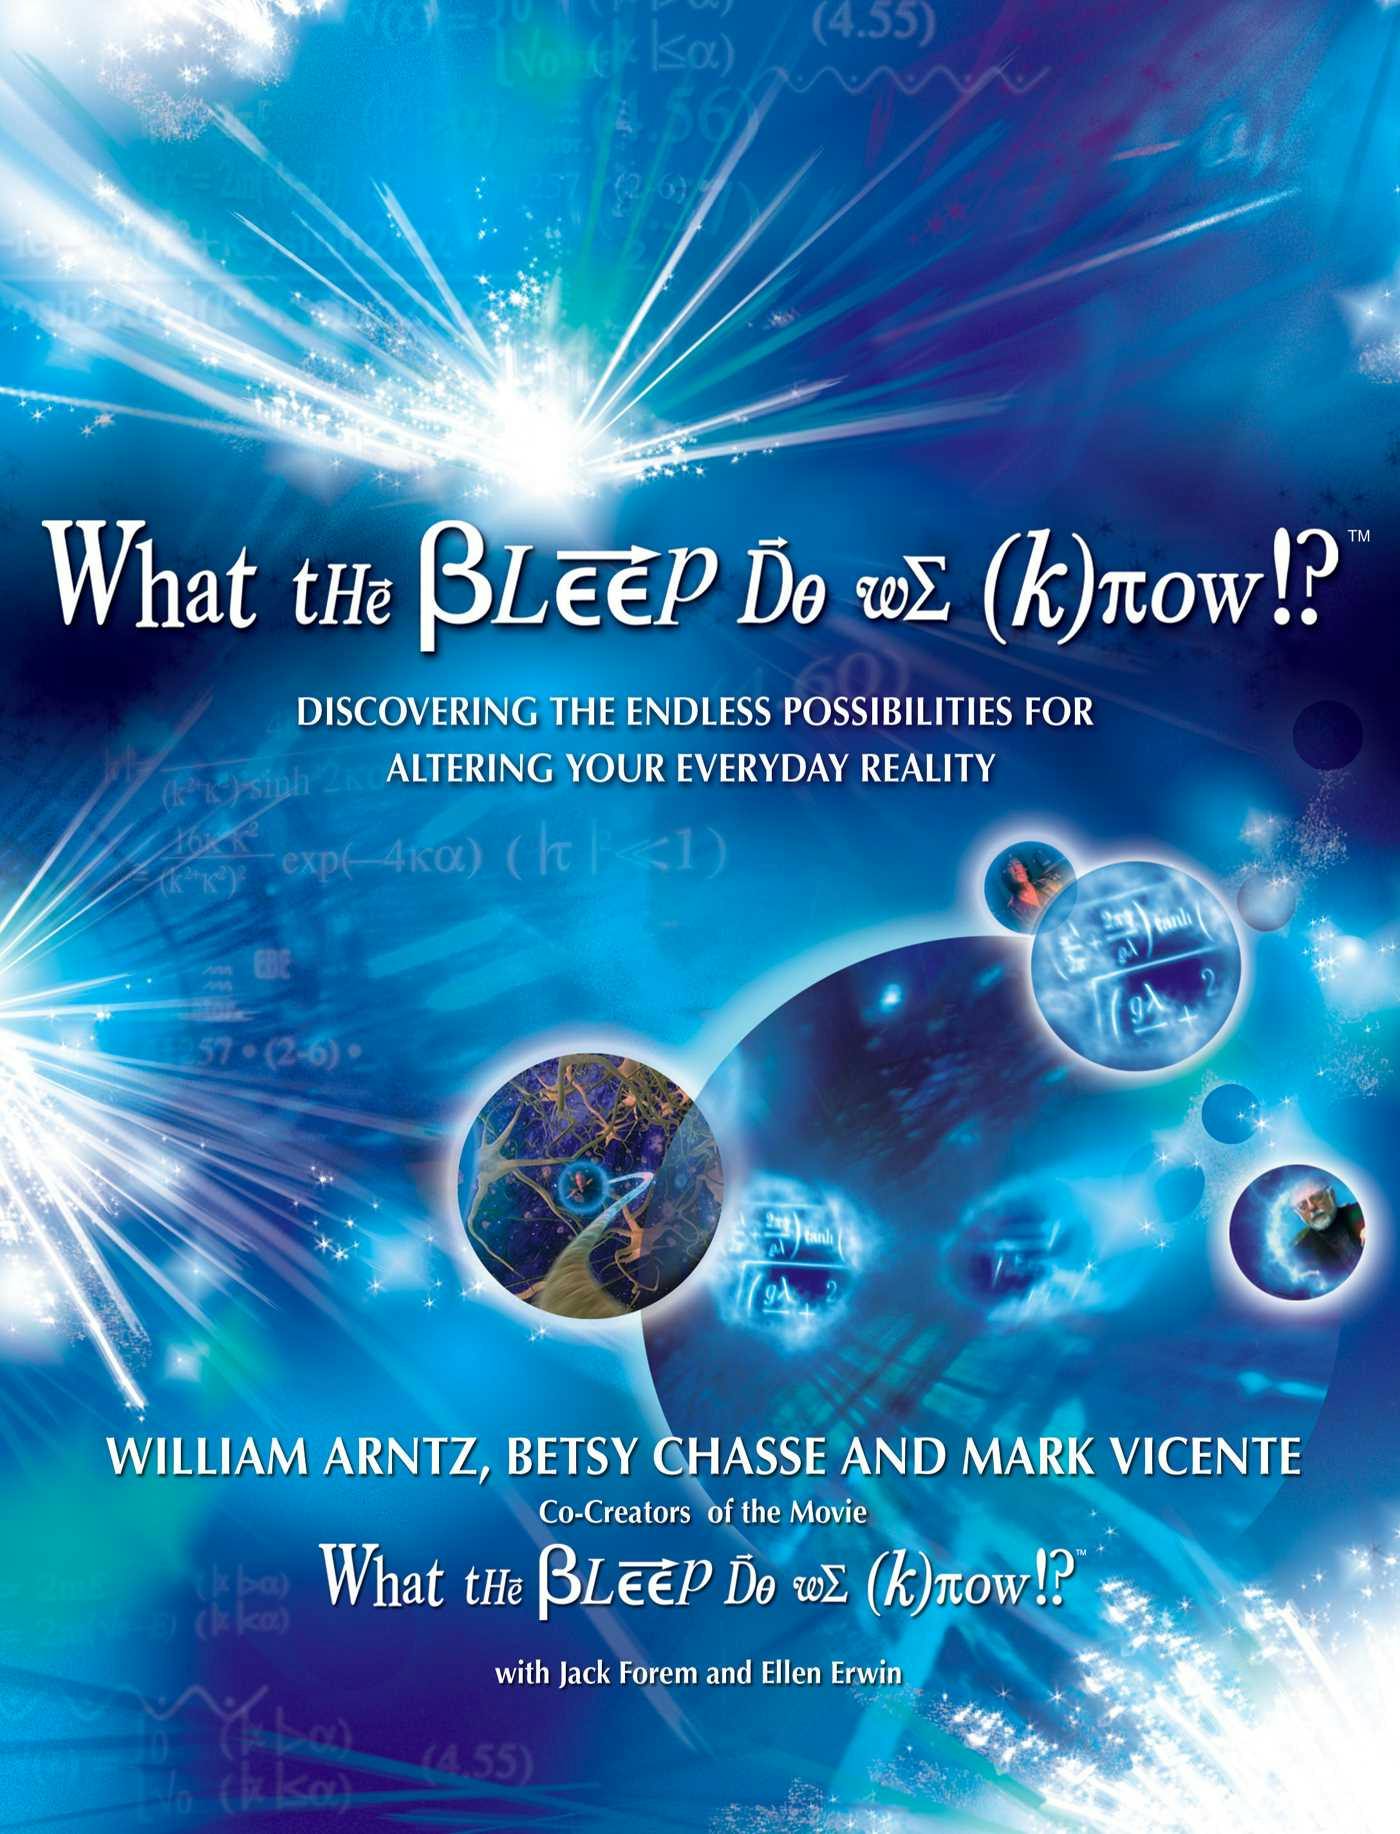 What the Bleep Do We Know!?™: Discovering the Endless Possibilities for Altering Your Everyday Reality - Mark Vicente, William Arntz, Betsy Chasse